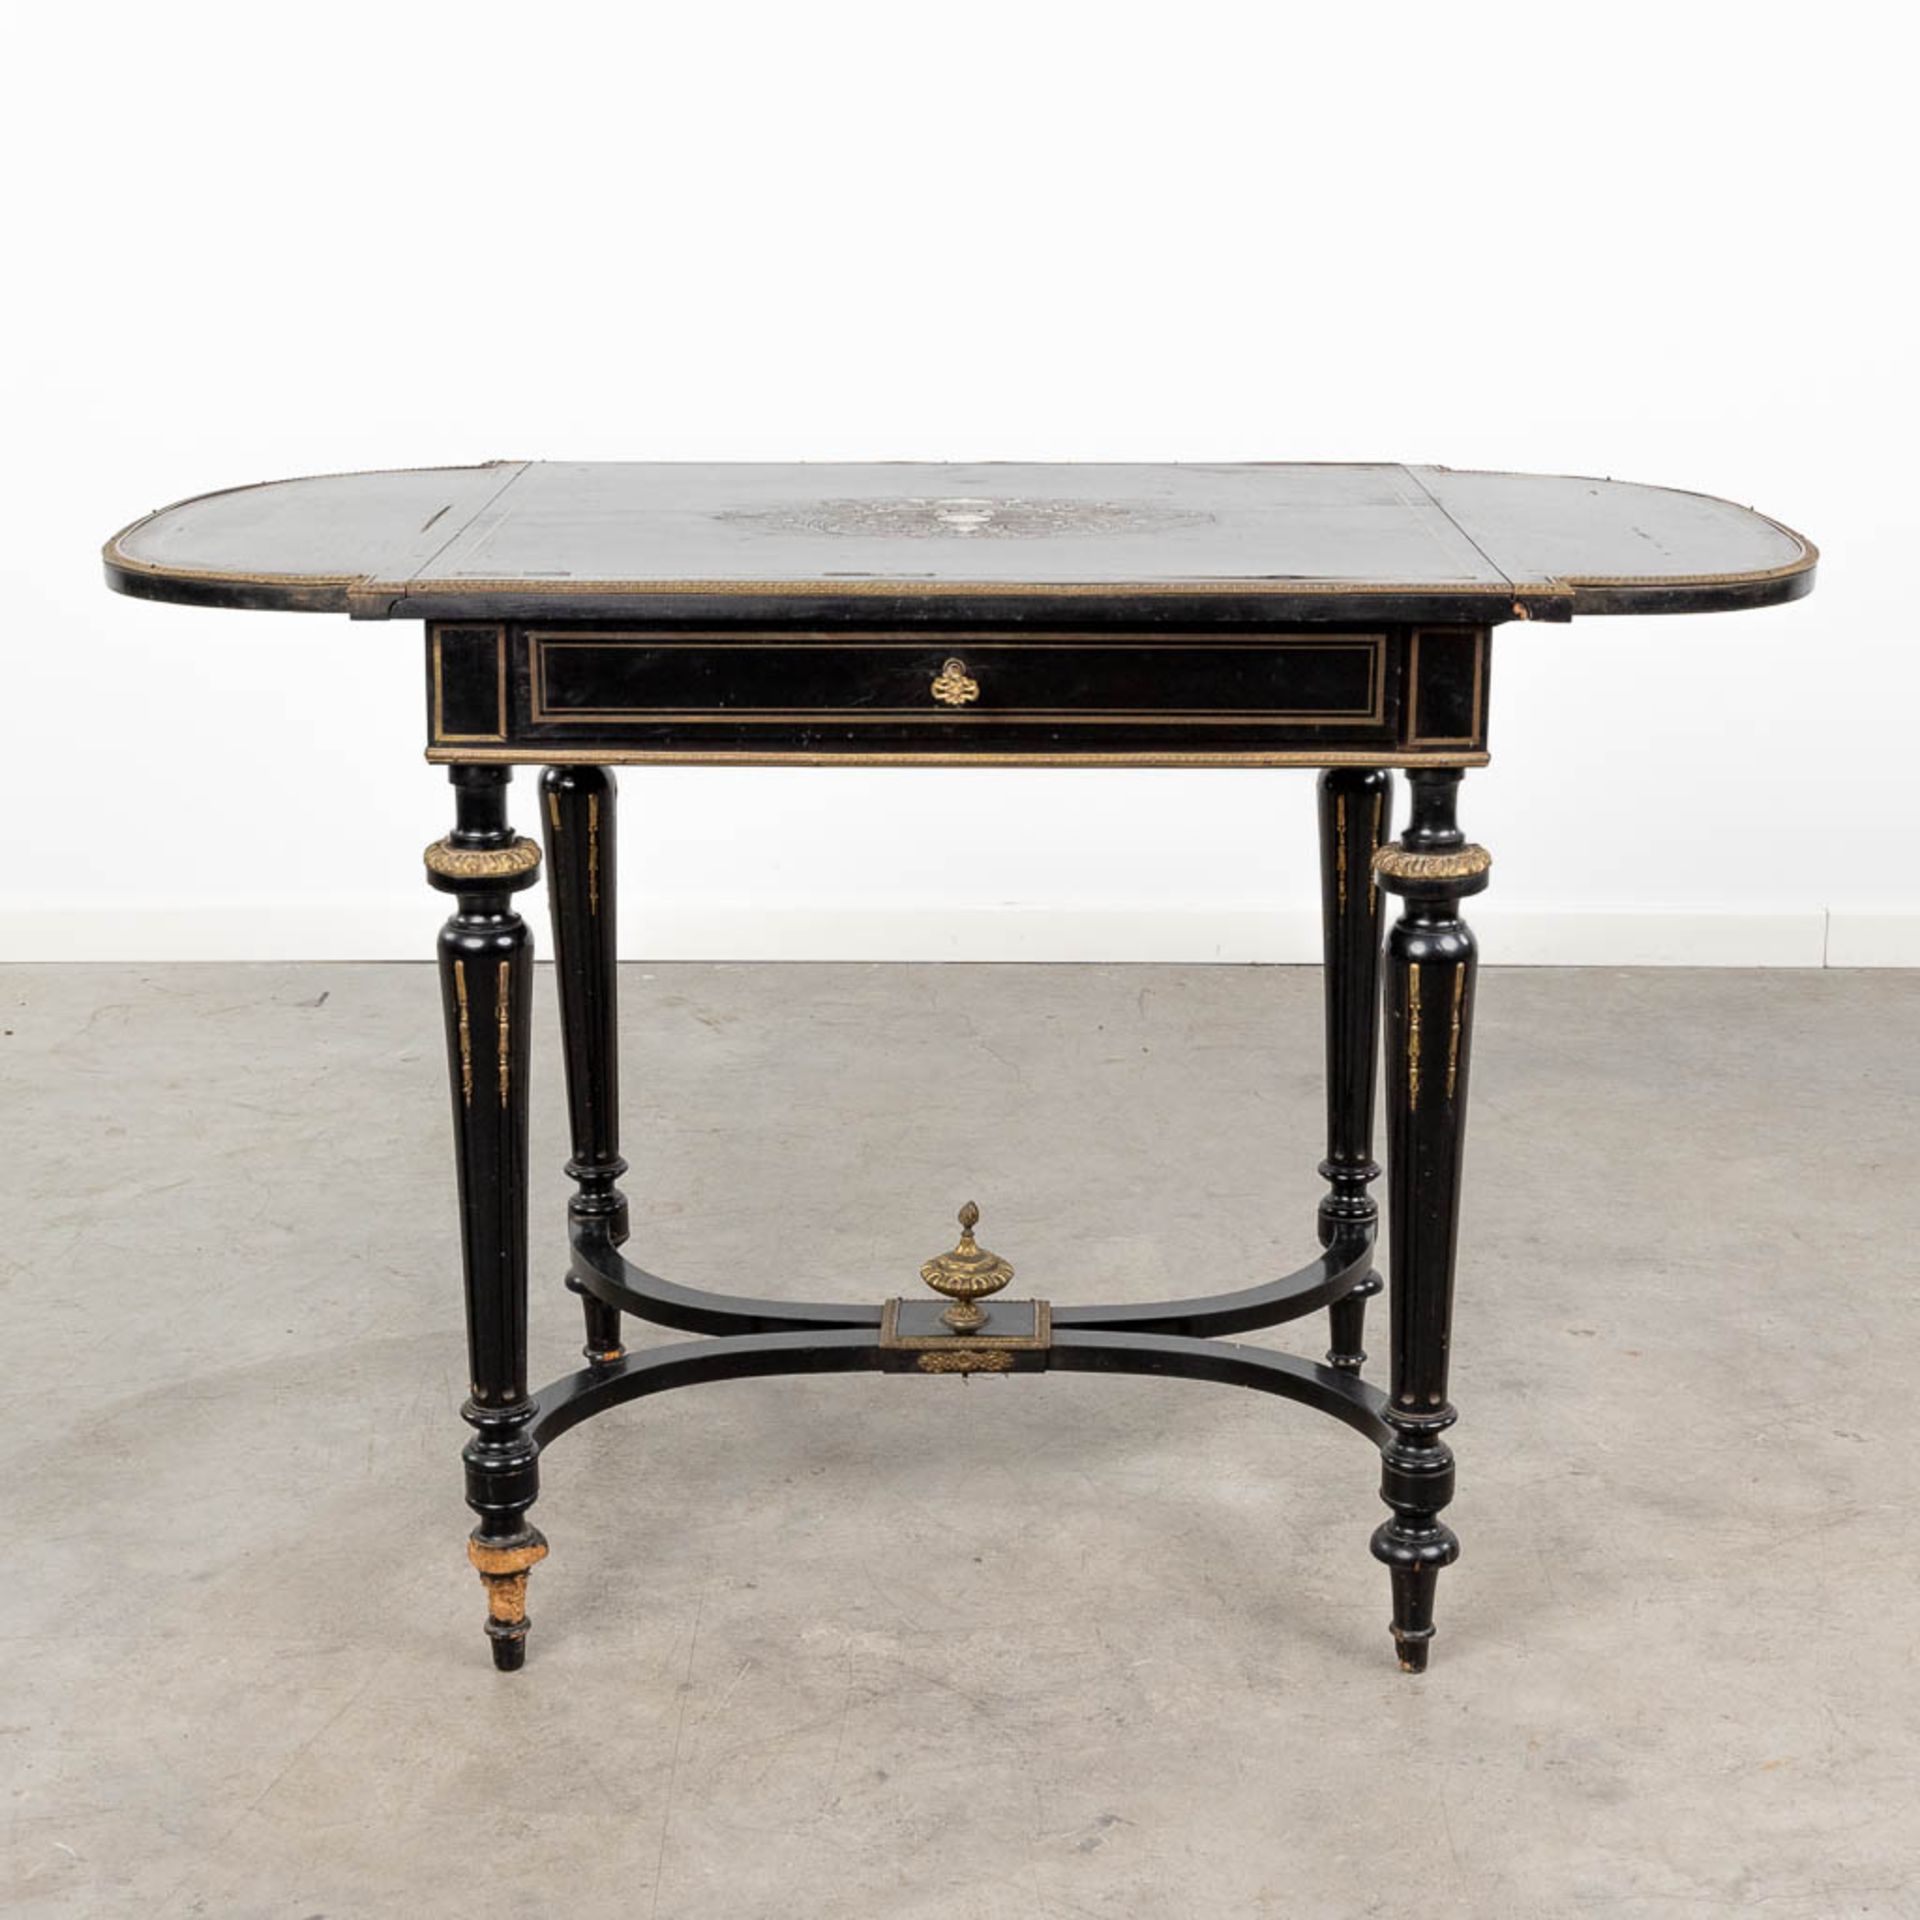 A game table made of ebonised wood inlaid with marquetry and mounted with bronze in Napoleon 3 style